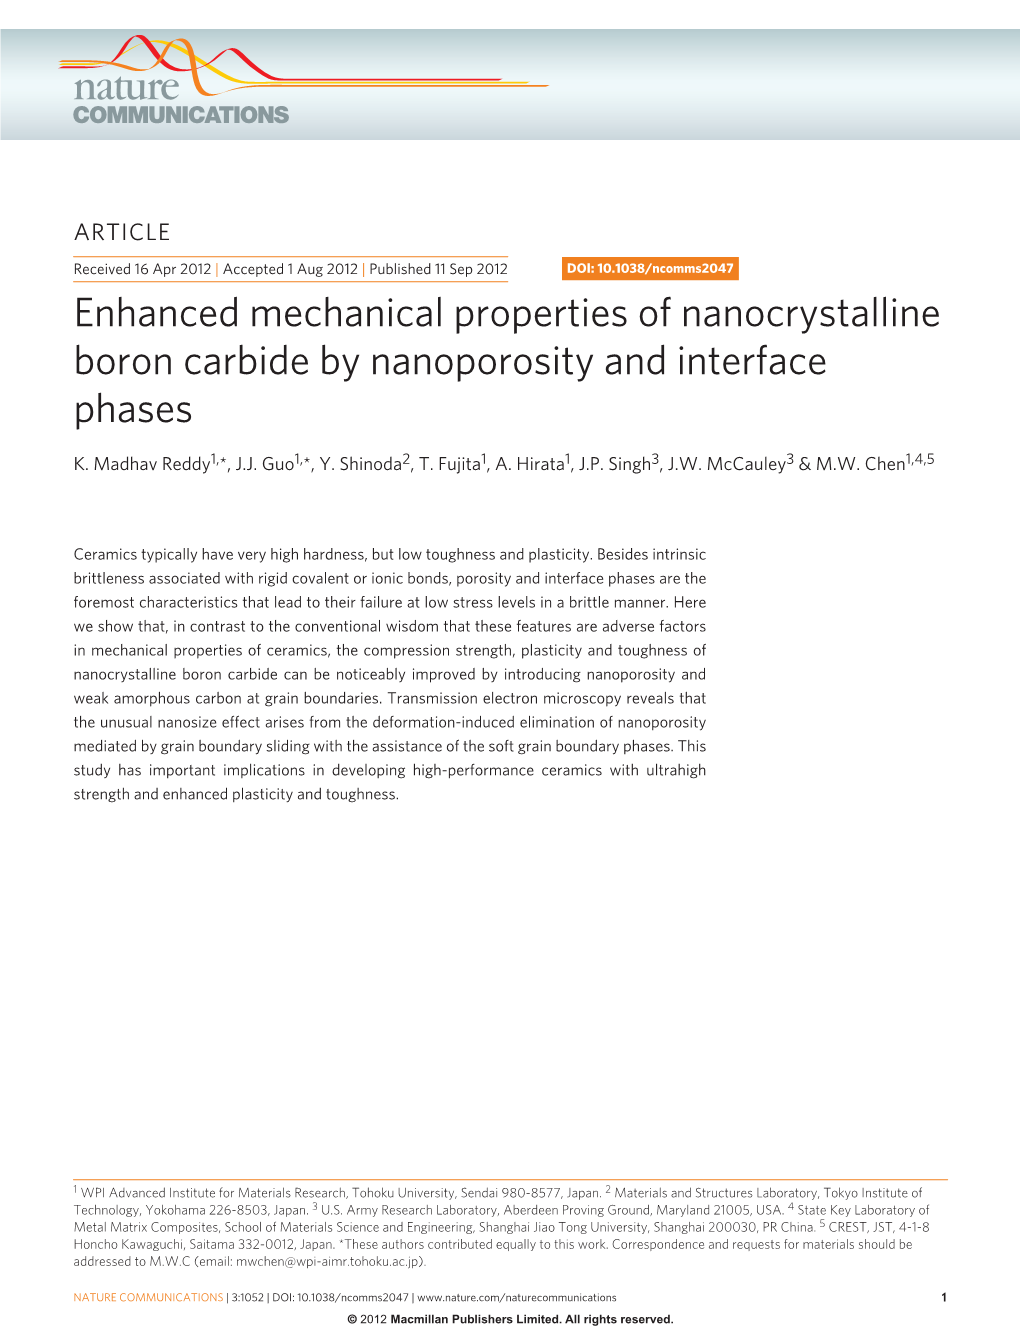 Enhanced Mechanical Properties of Nanocrystalline Boron Carbide by Nanoporosity and Interface Phases